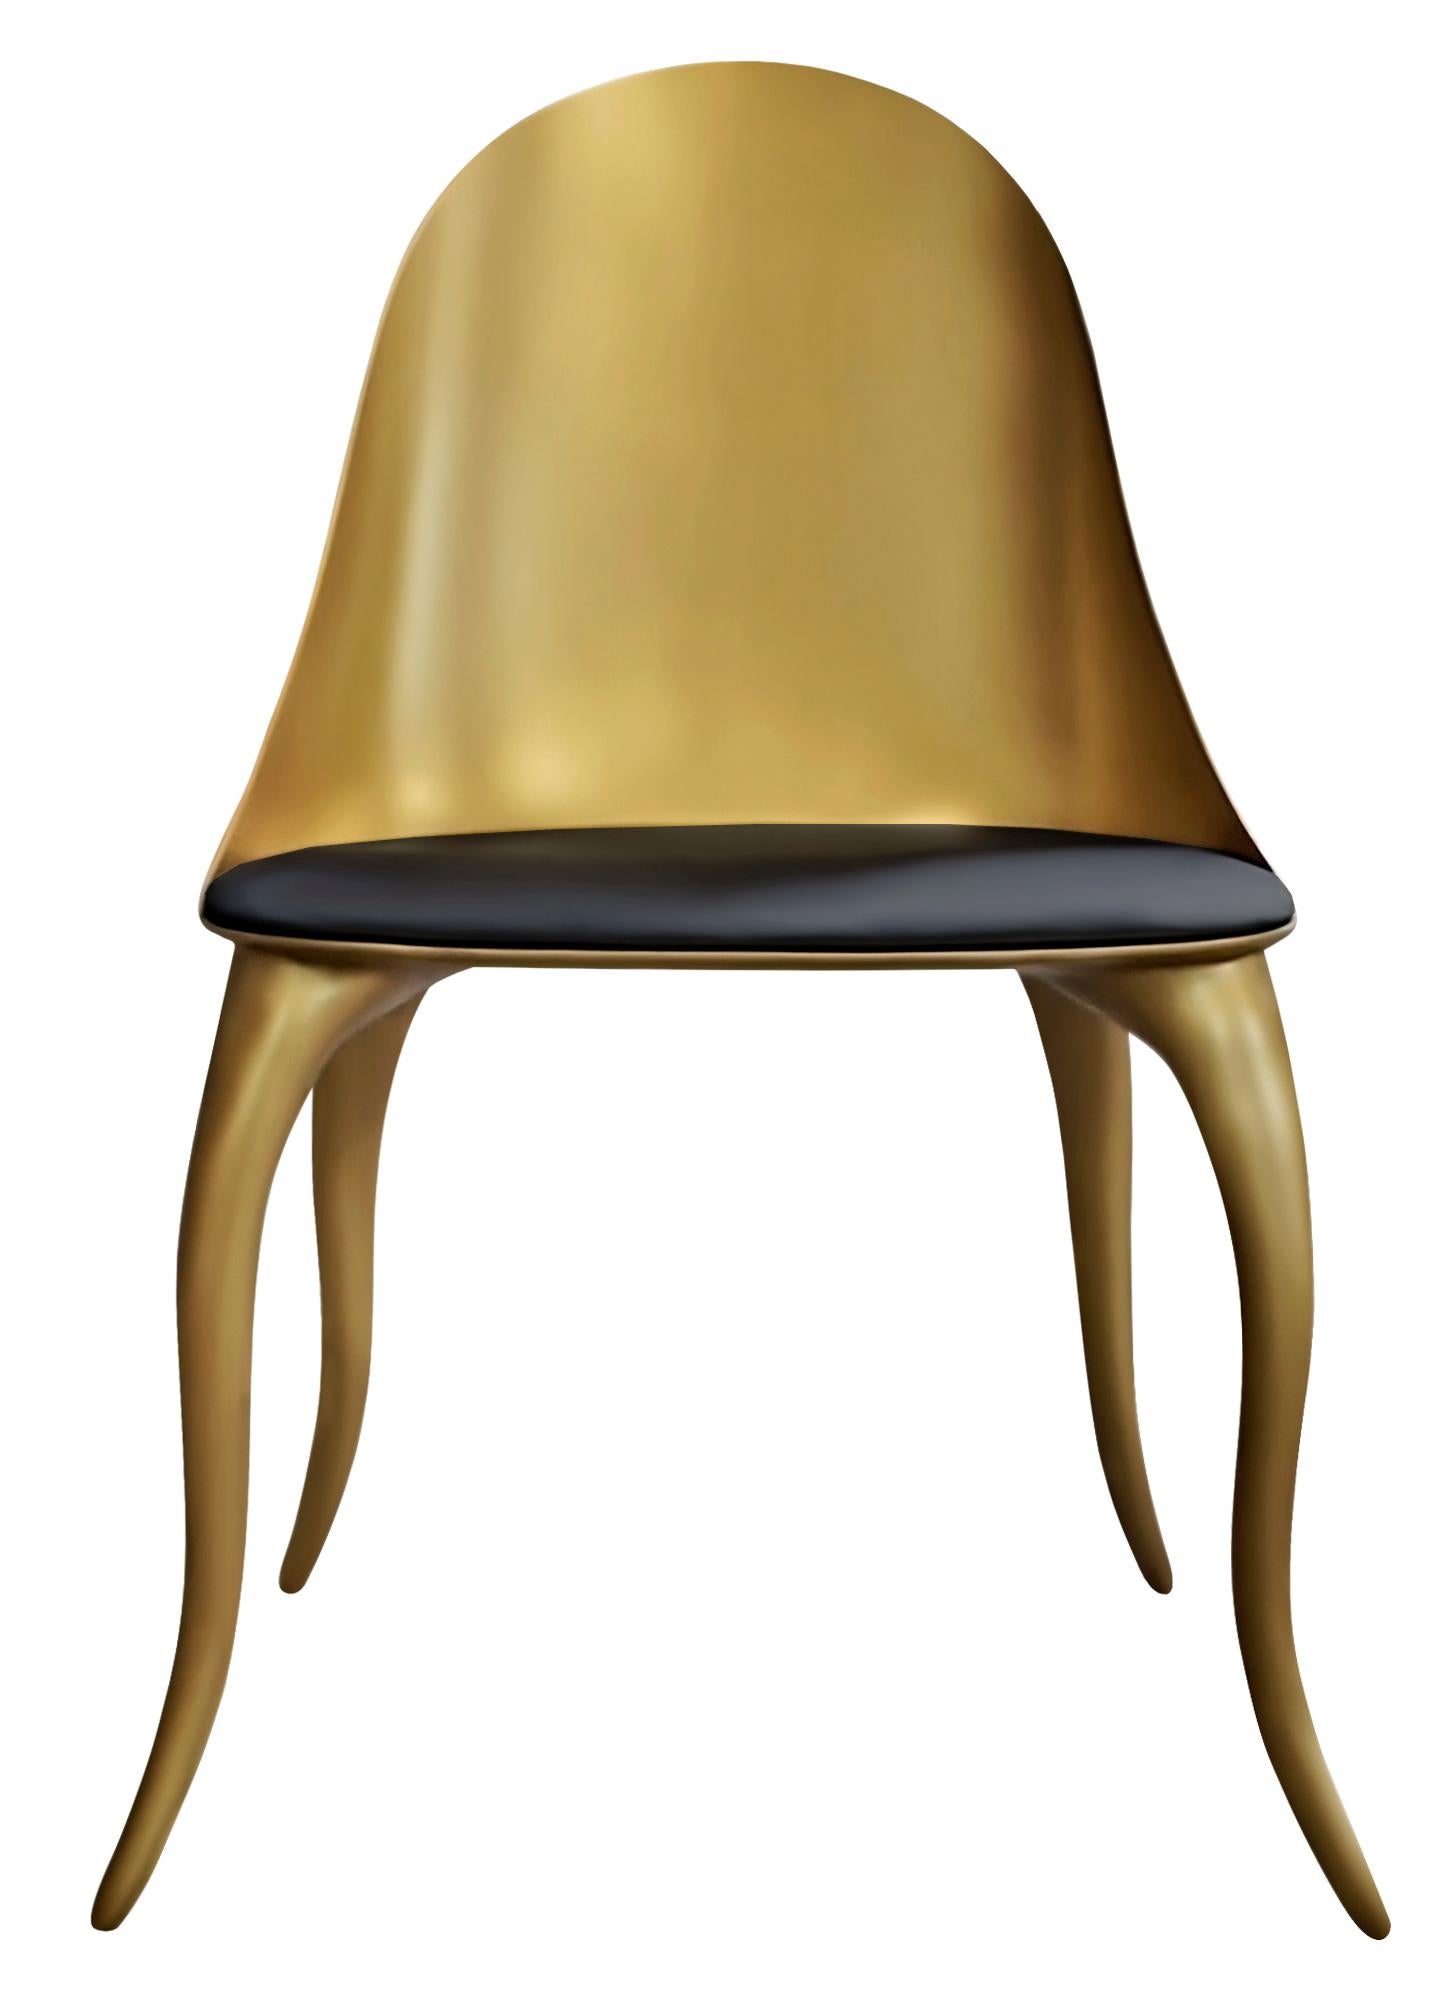 Sculptural and Luxurious Chair in Organic Design Style

Body: Resin reinforced with fiberglass finished in aged gold color
Upholstery: Satin fabric.

Dimensions (cm): 53 x 58 x 90 cm
Dimensions (in): 20.8 x 22.8 x 35.4 in

